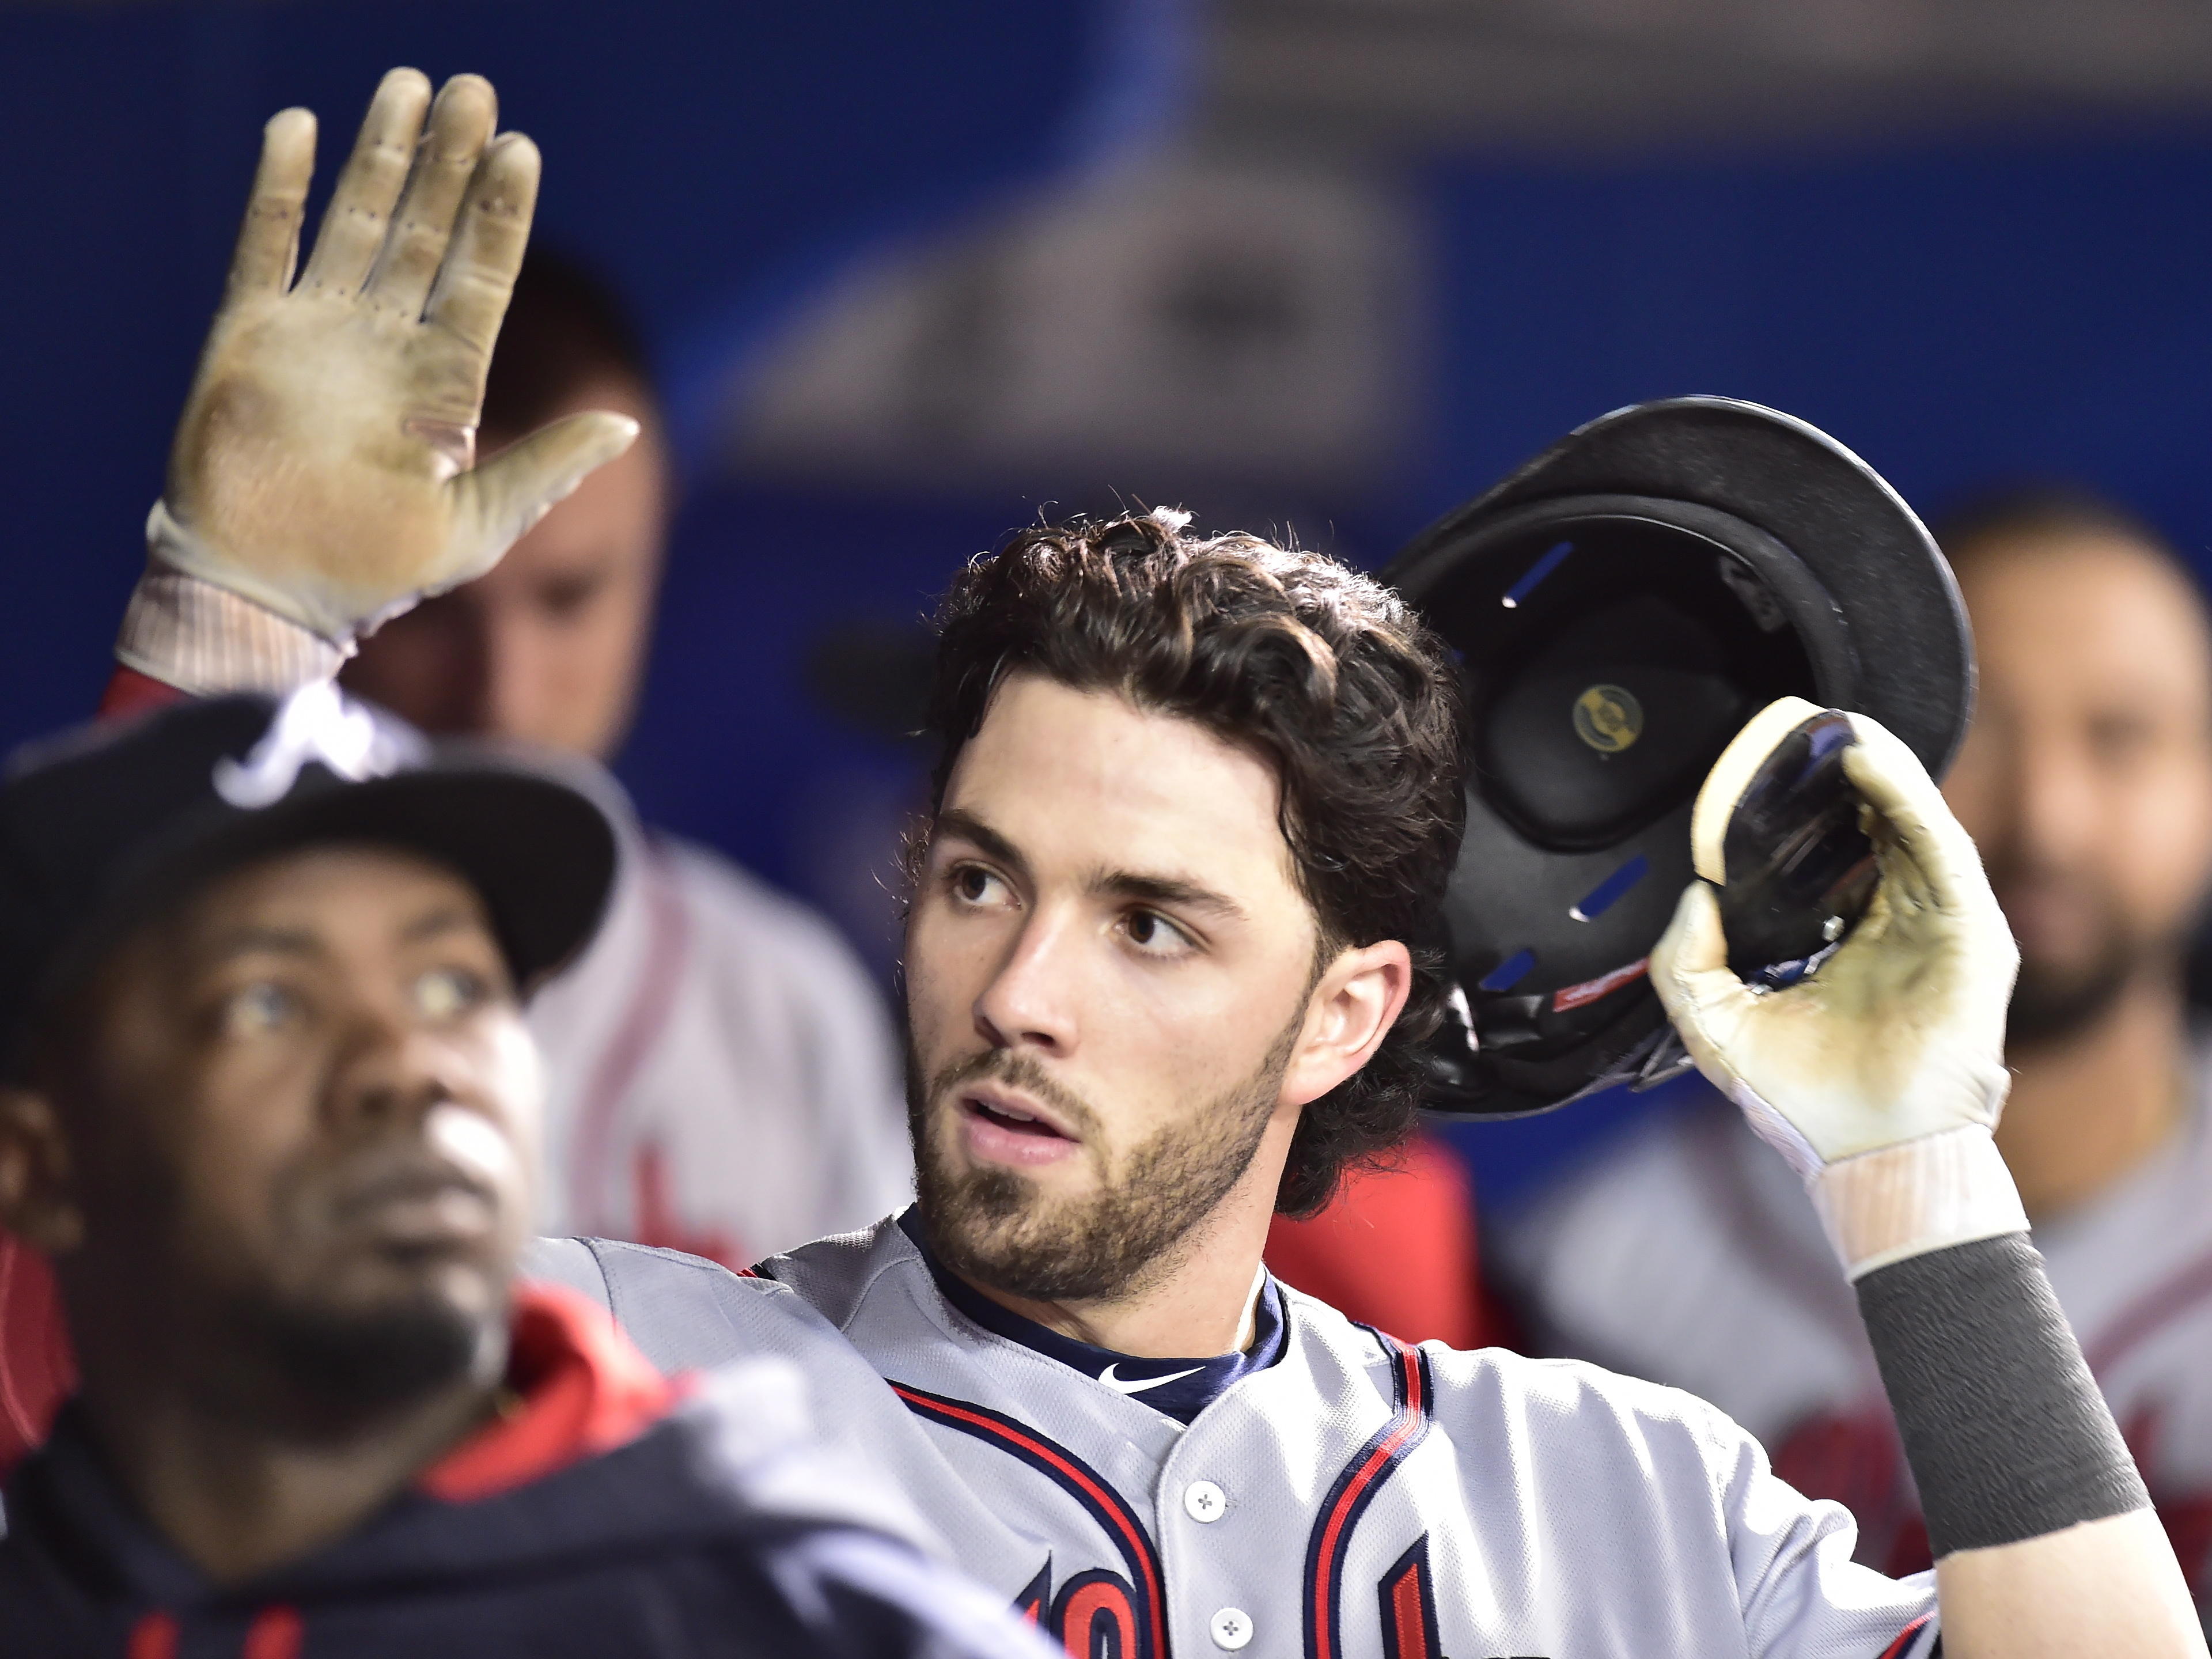 Dansby Swanson on early struggles and avoiding social media